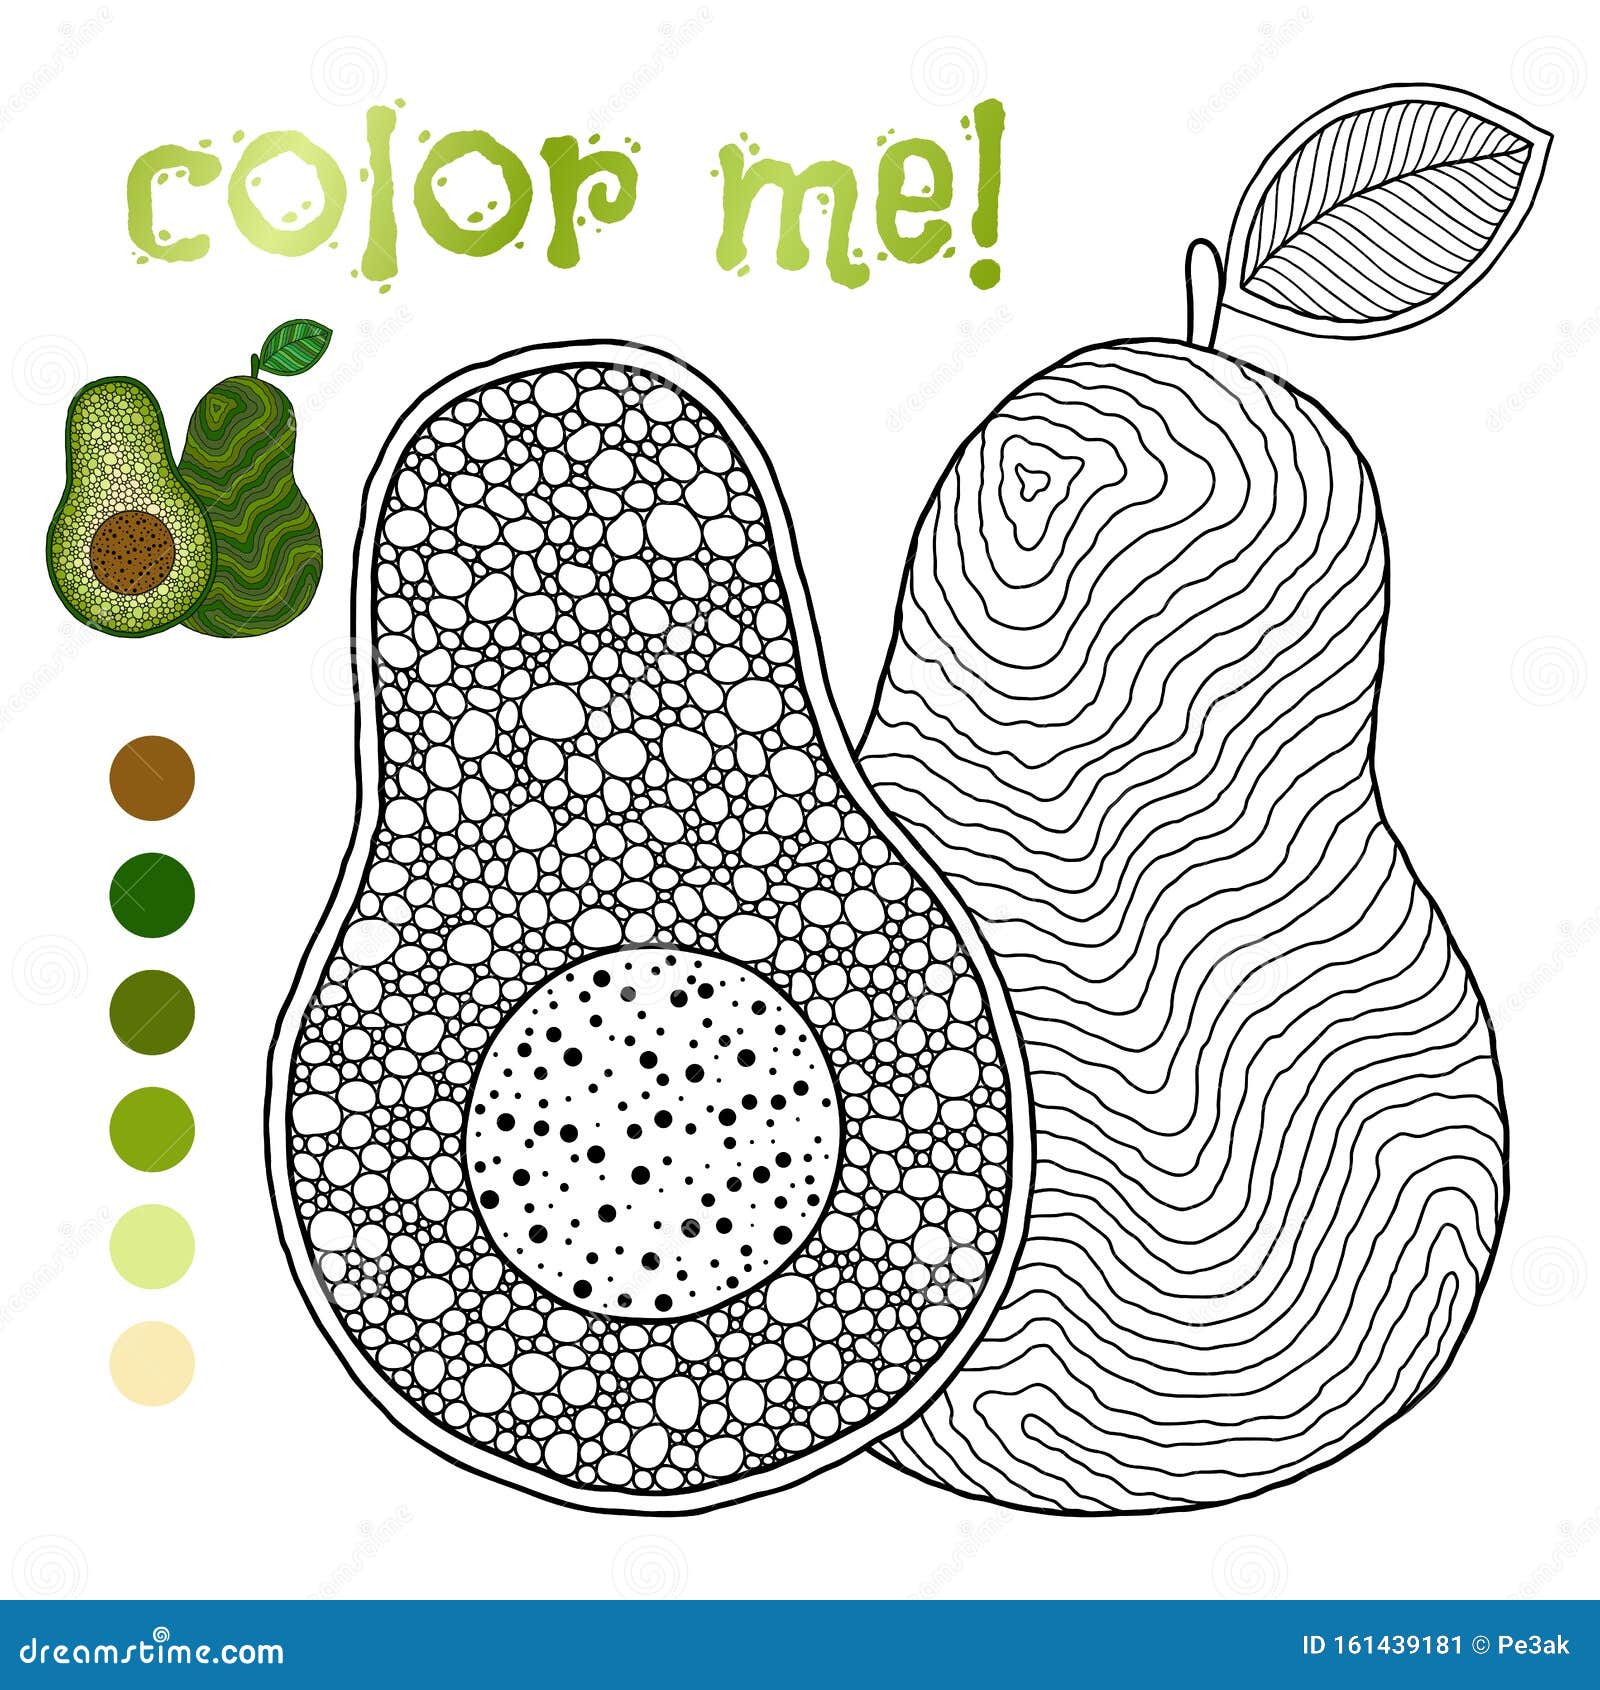 Download Coloring Book Page For Children With Outlines Of Avocado ...